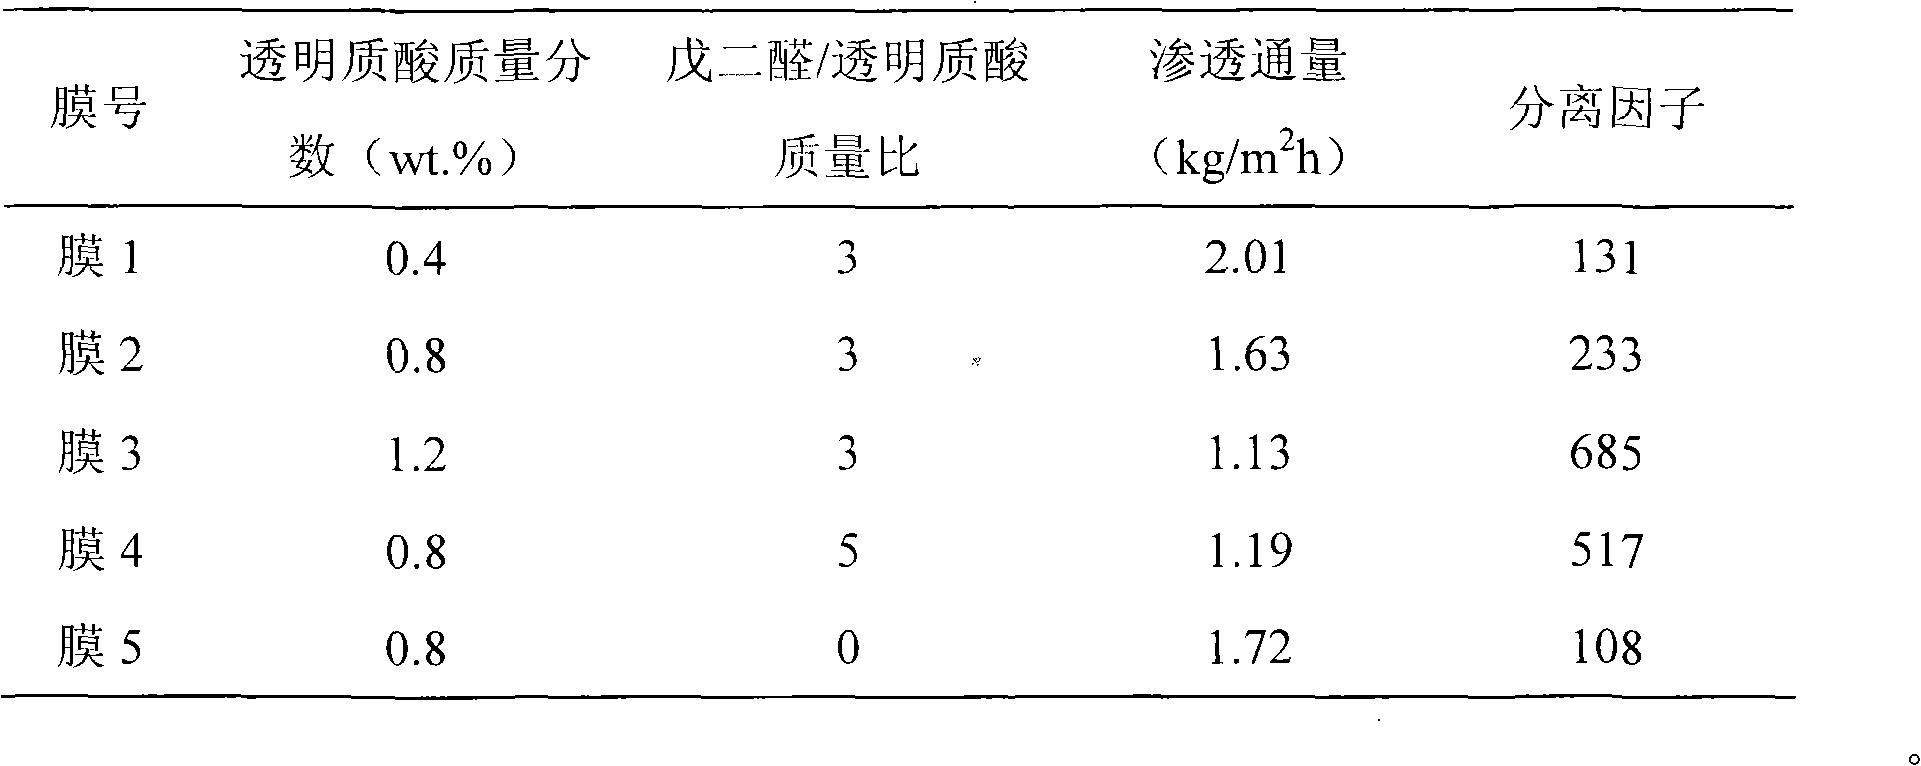 Hyaluronic acid/polyacrylonitrile compound film, method for preparing same and application thereof